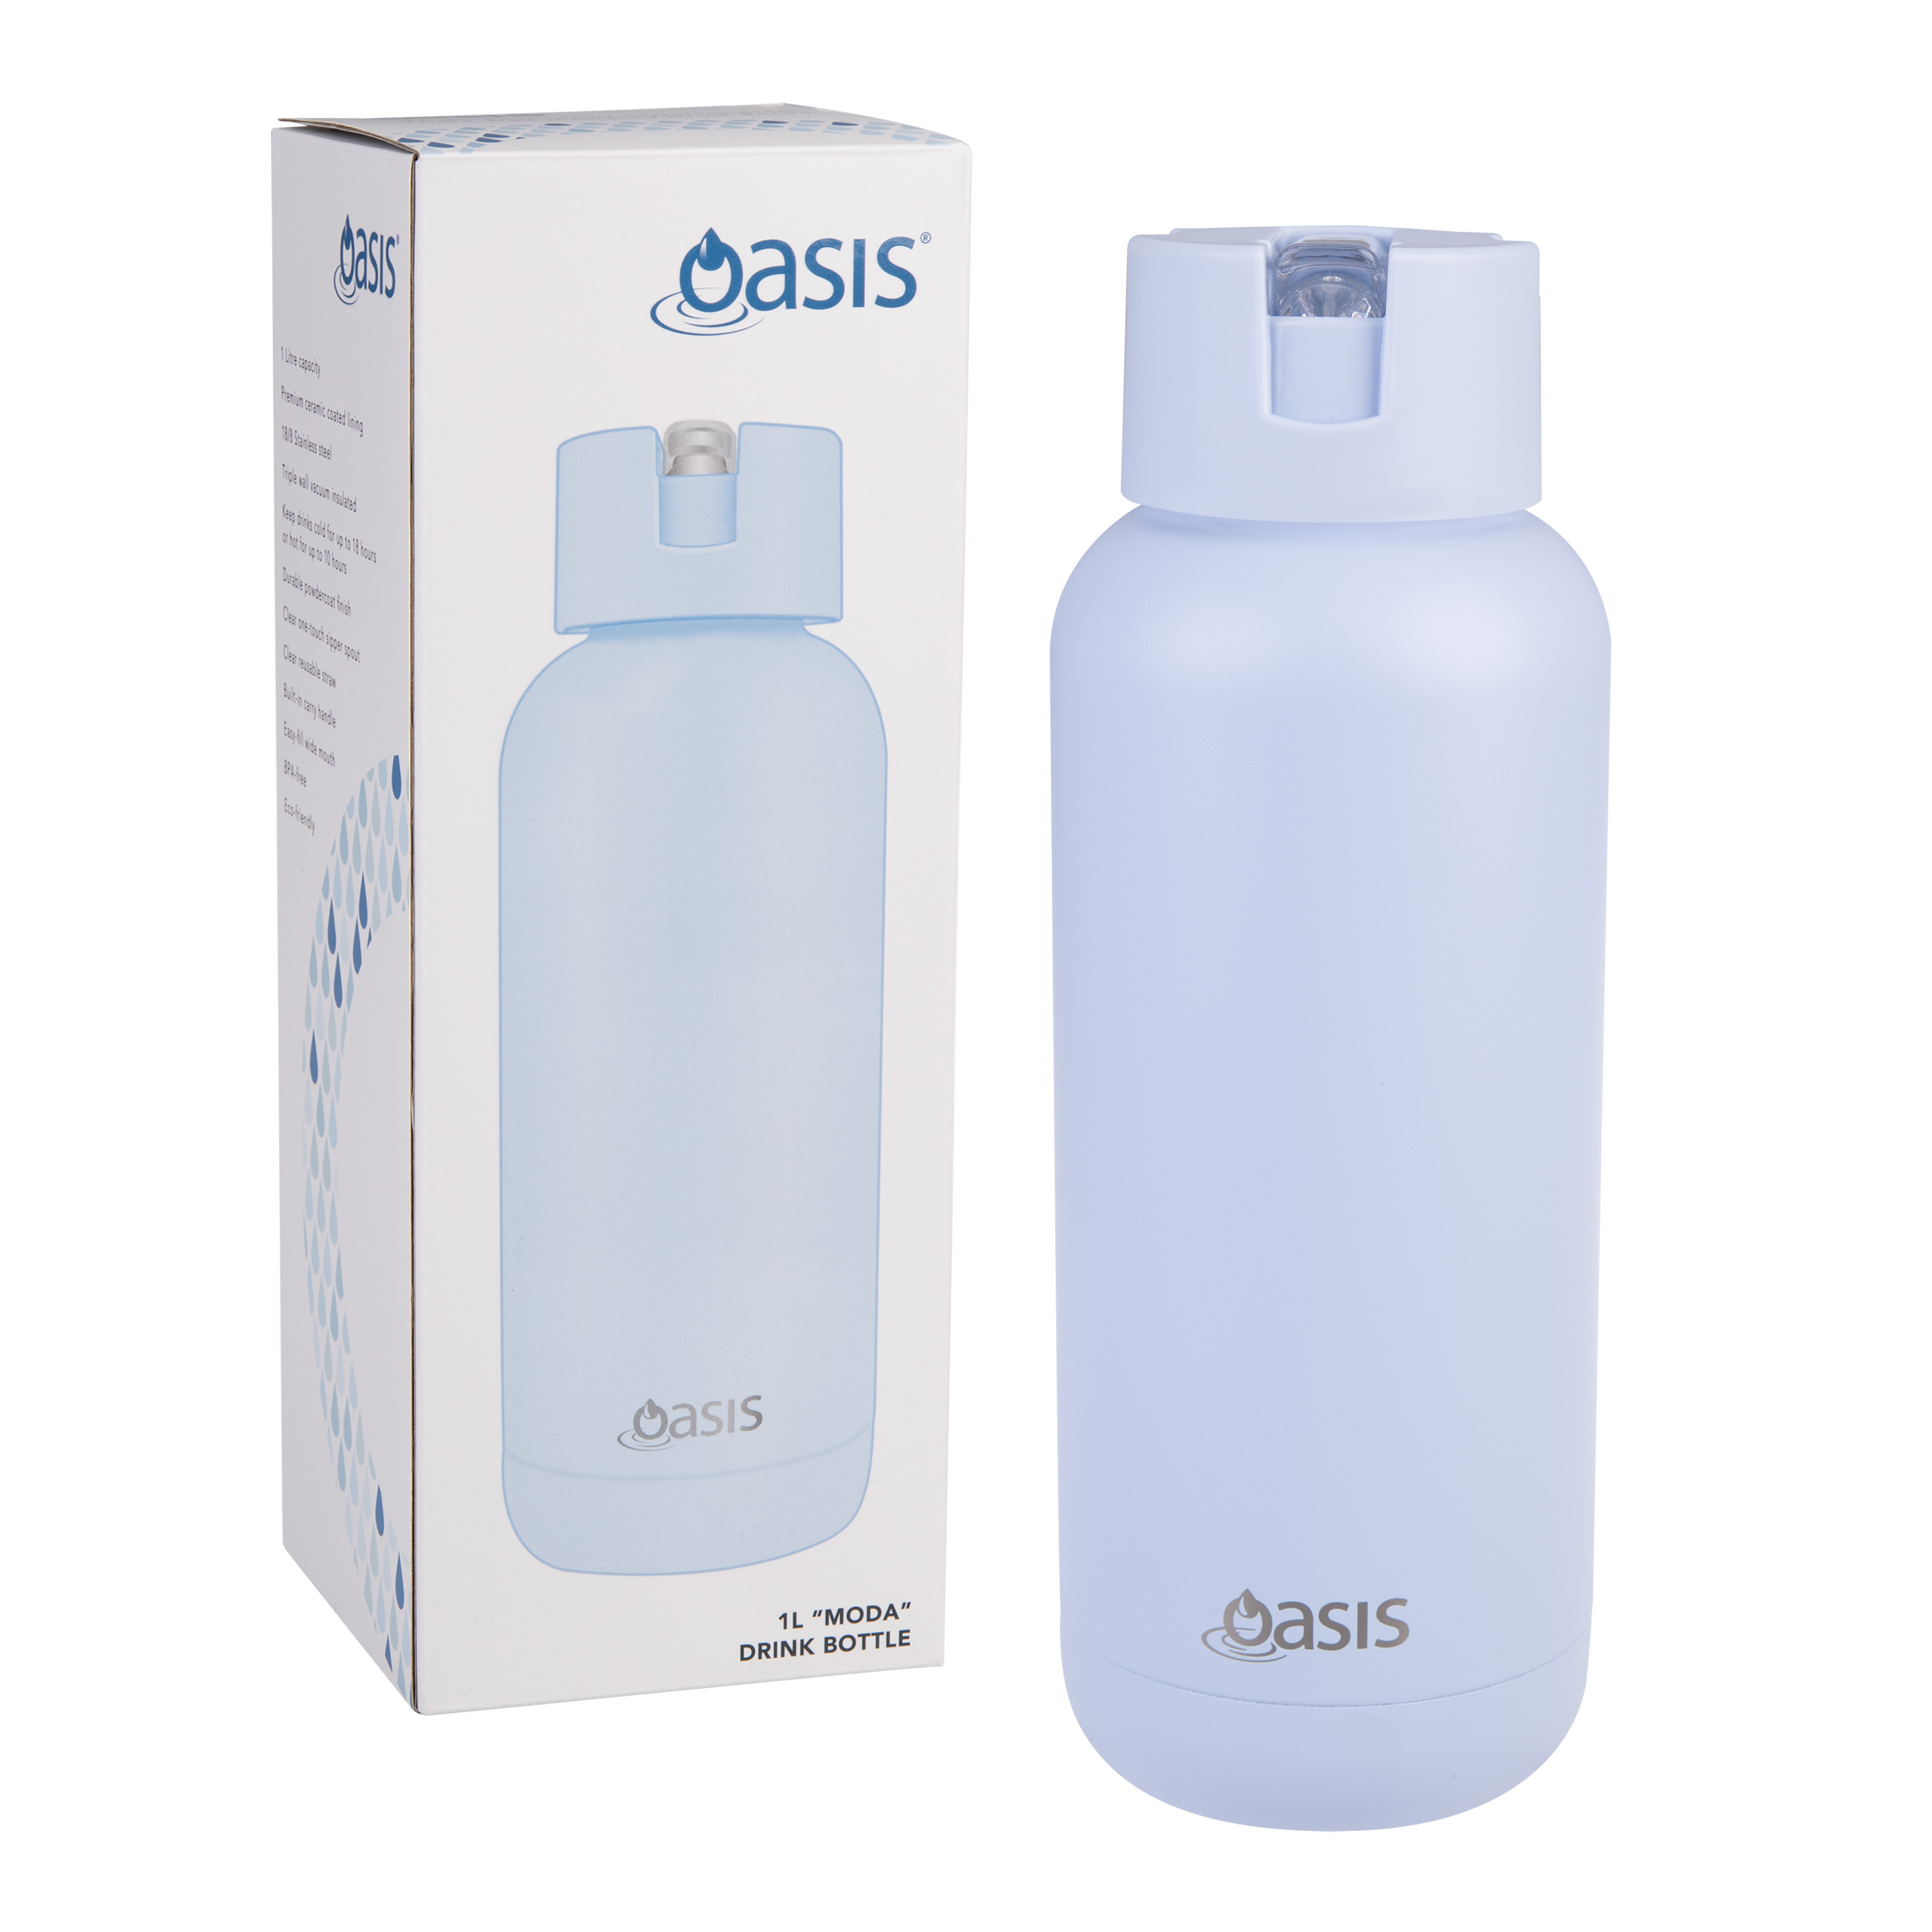 Oasis Stainless Steel Ceramic Moda Triple Wall Insulated Drink Bottle 1 Litre Periwinkle